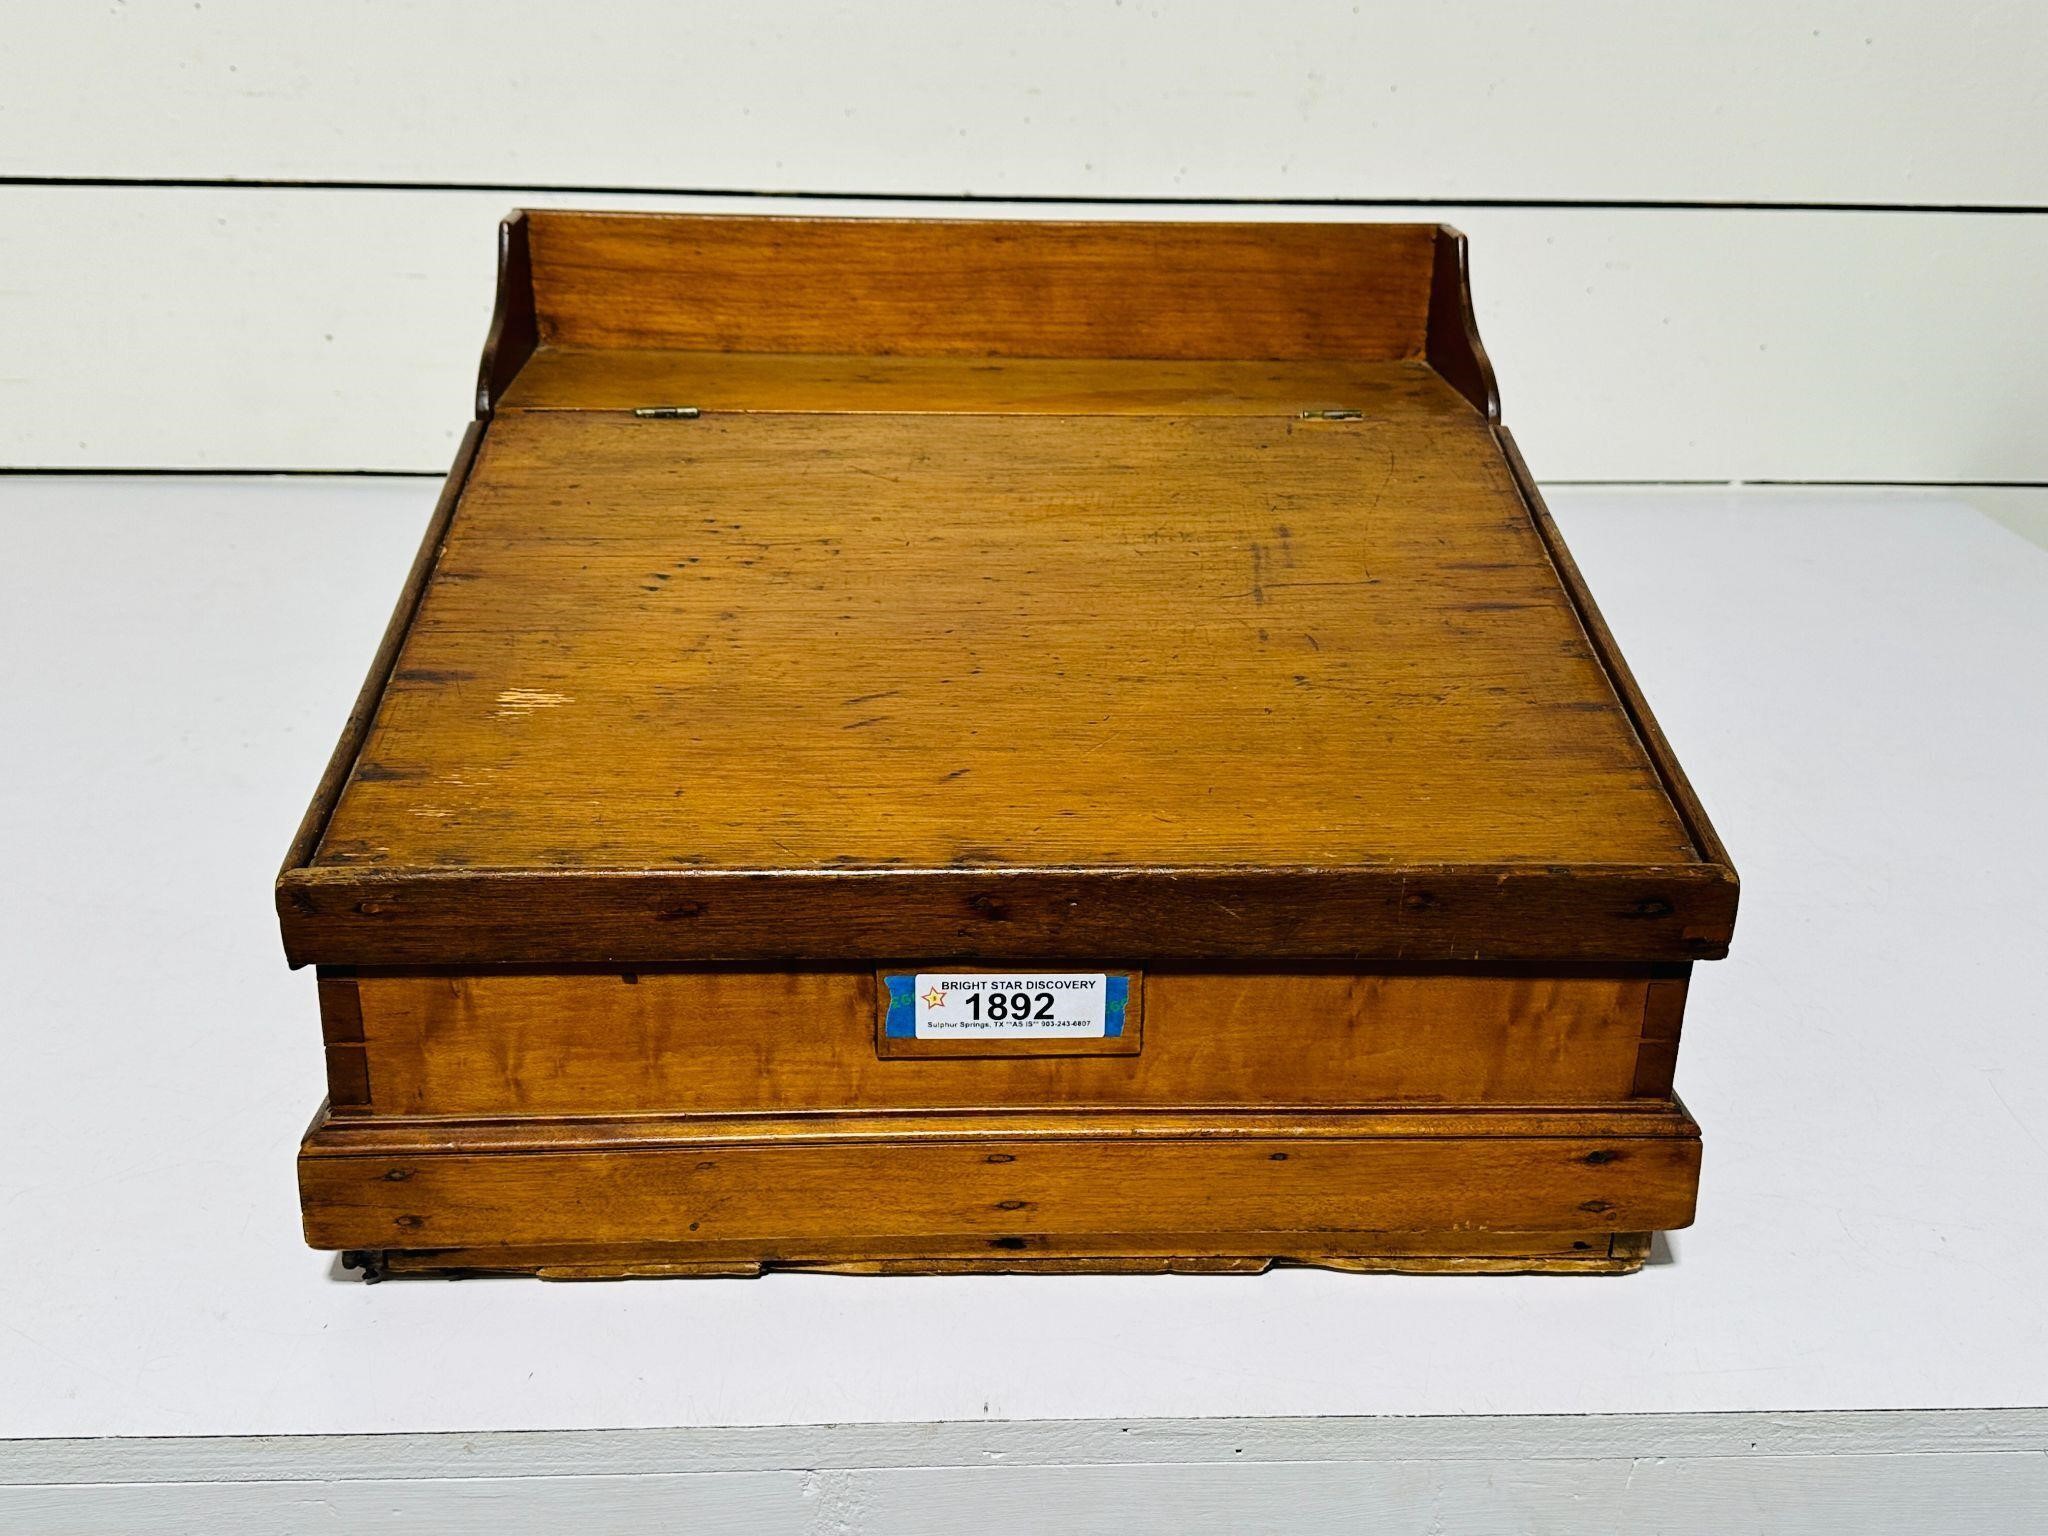 Early Pine Shop Keepers Desk